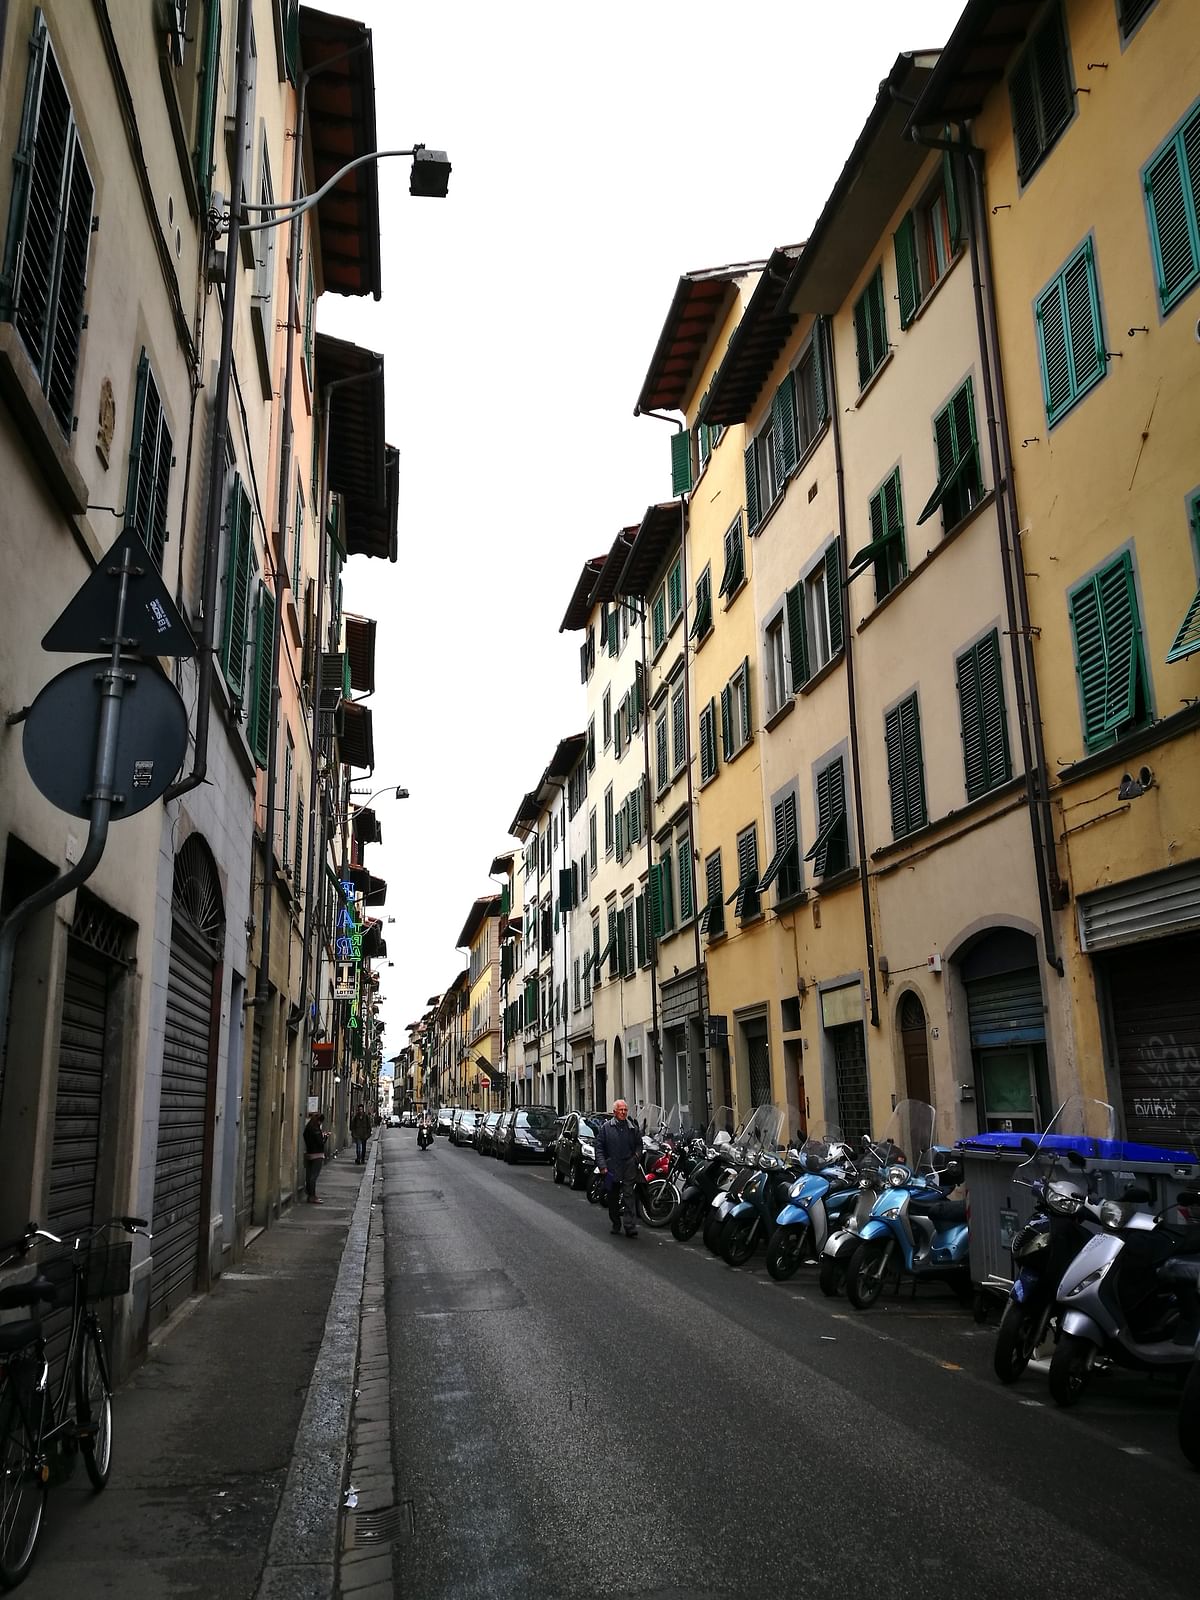 Florence in a rush: Here’s how I spent 24 hours in Europe’s most photogenic city.